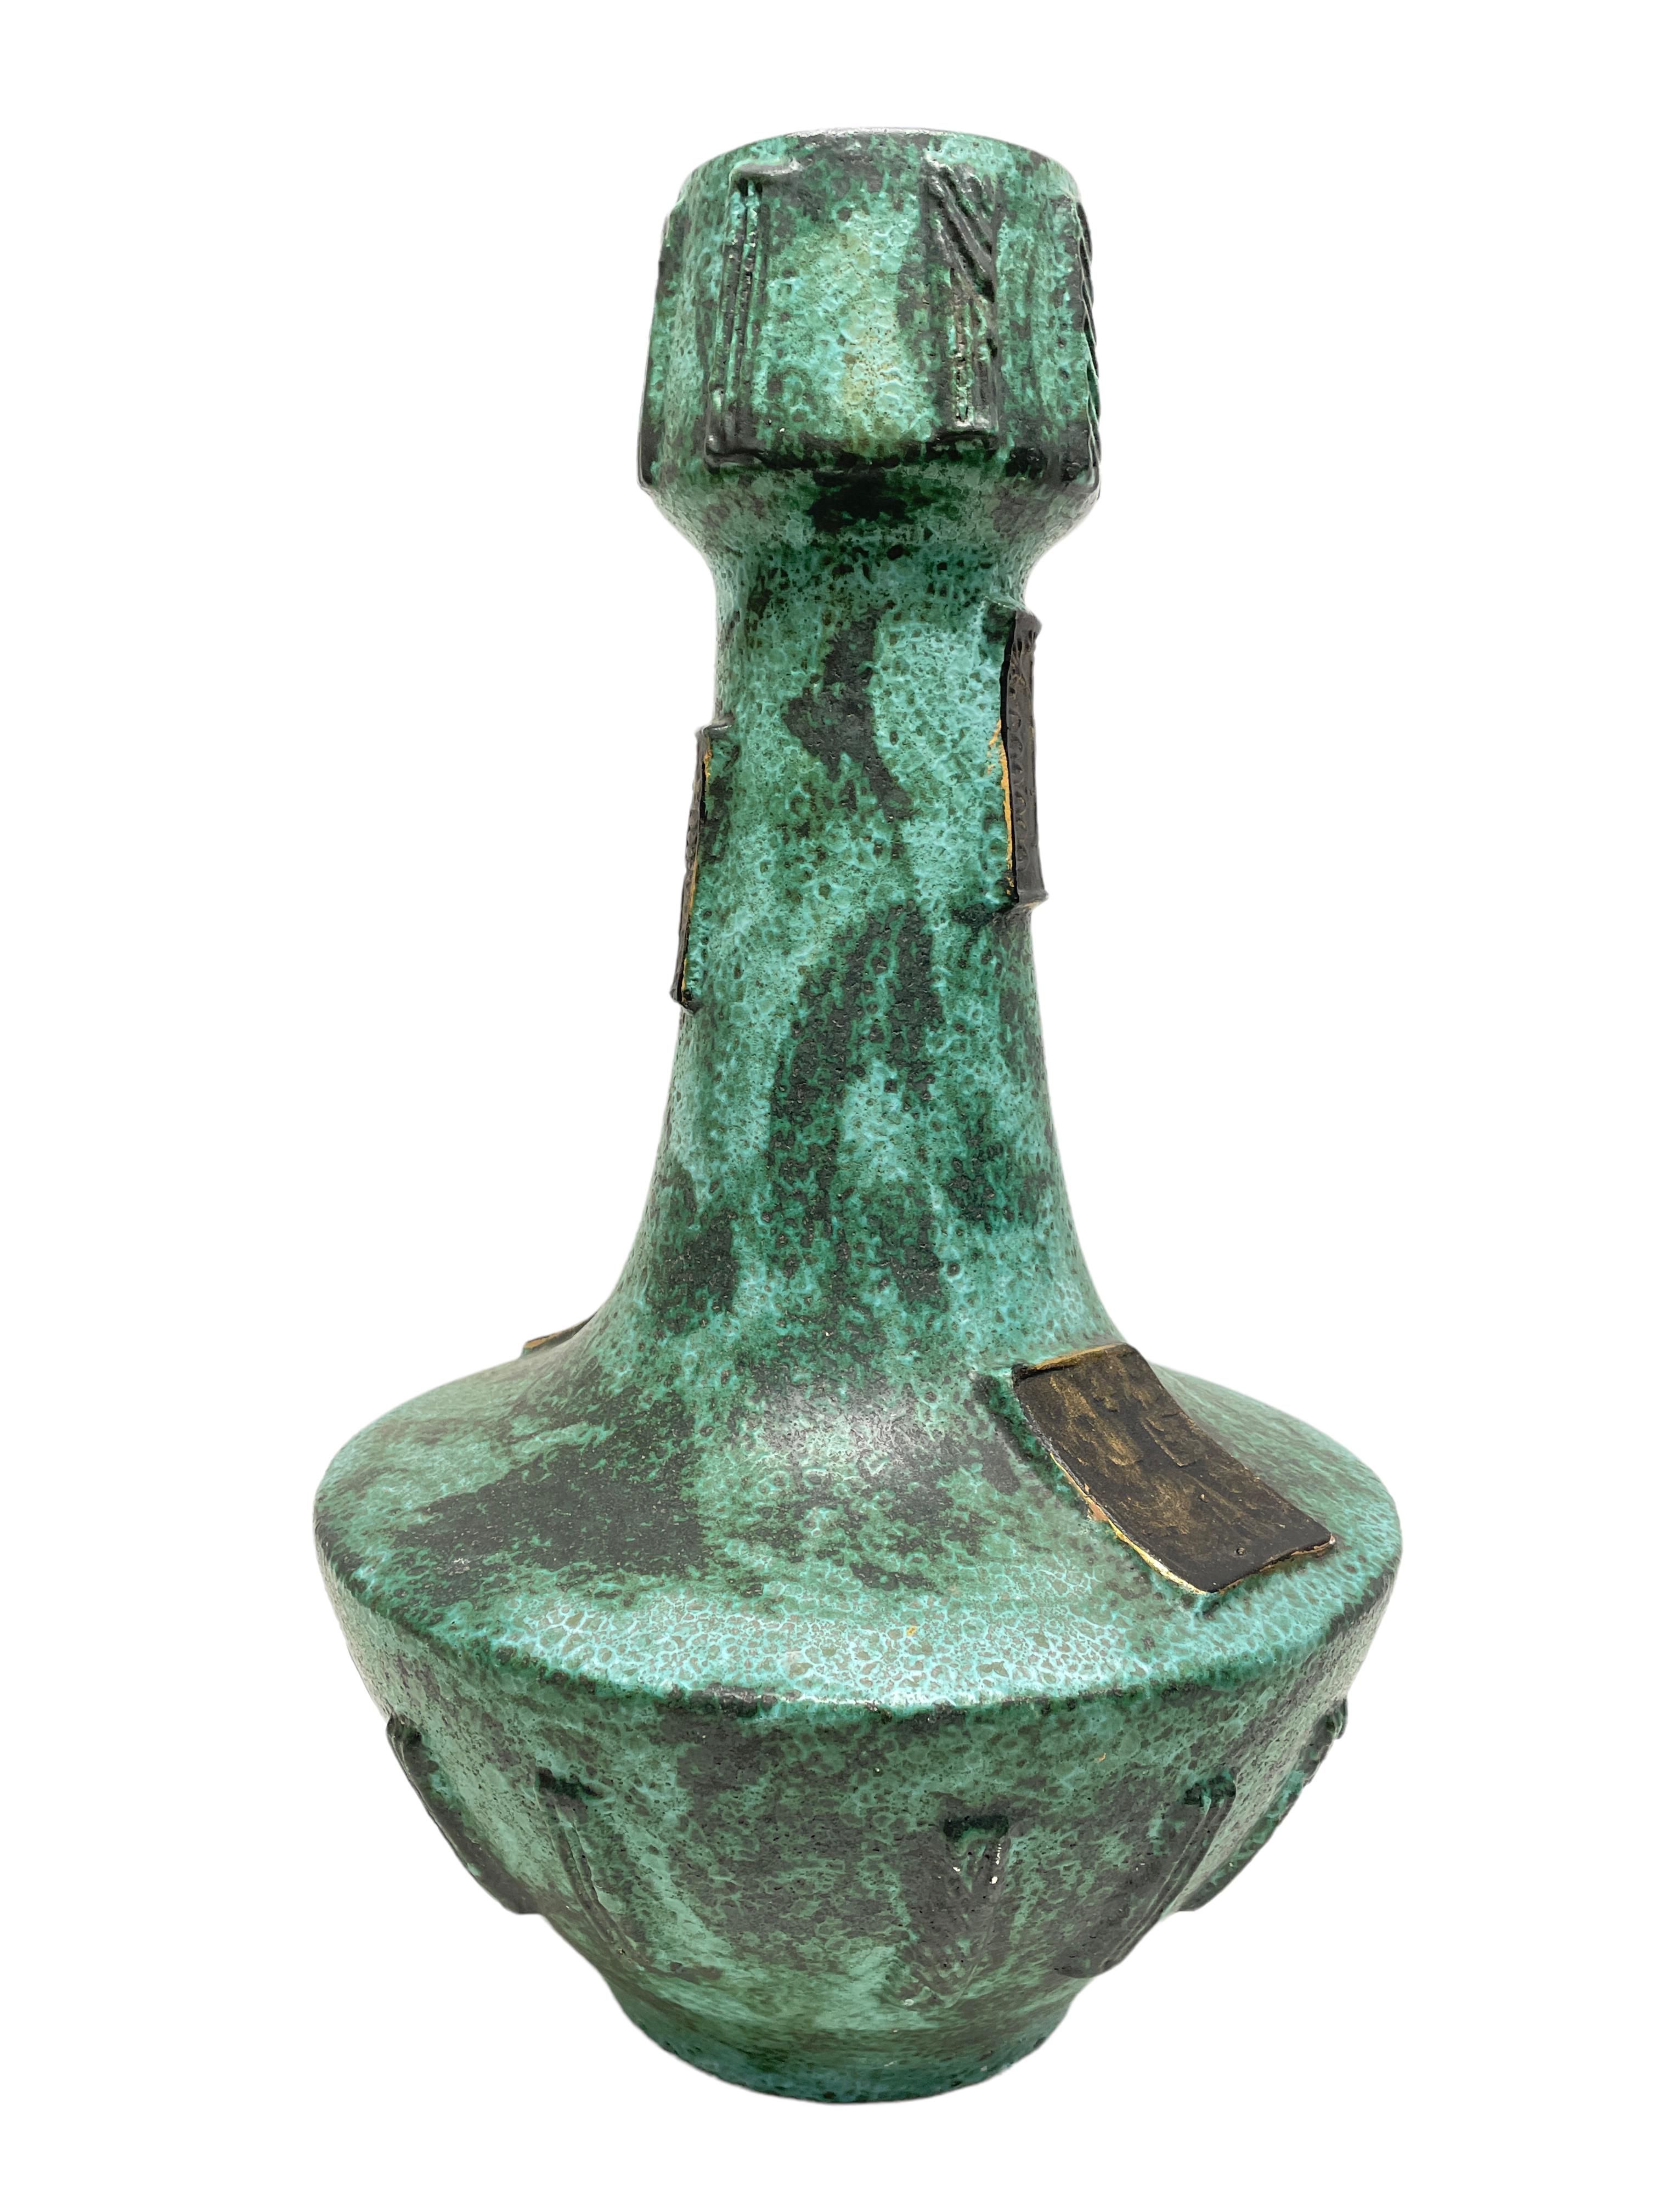 Hand-Crafted Tall Mid-Century West German Pottery Jade Green Egypt Motif Floor Vase, 1970s For Sale